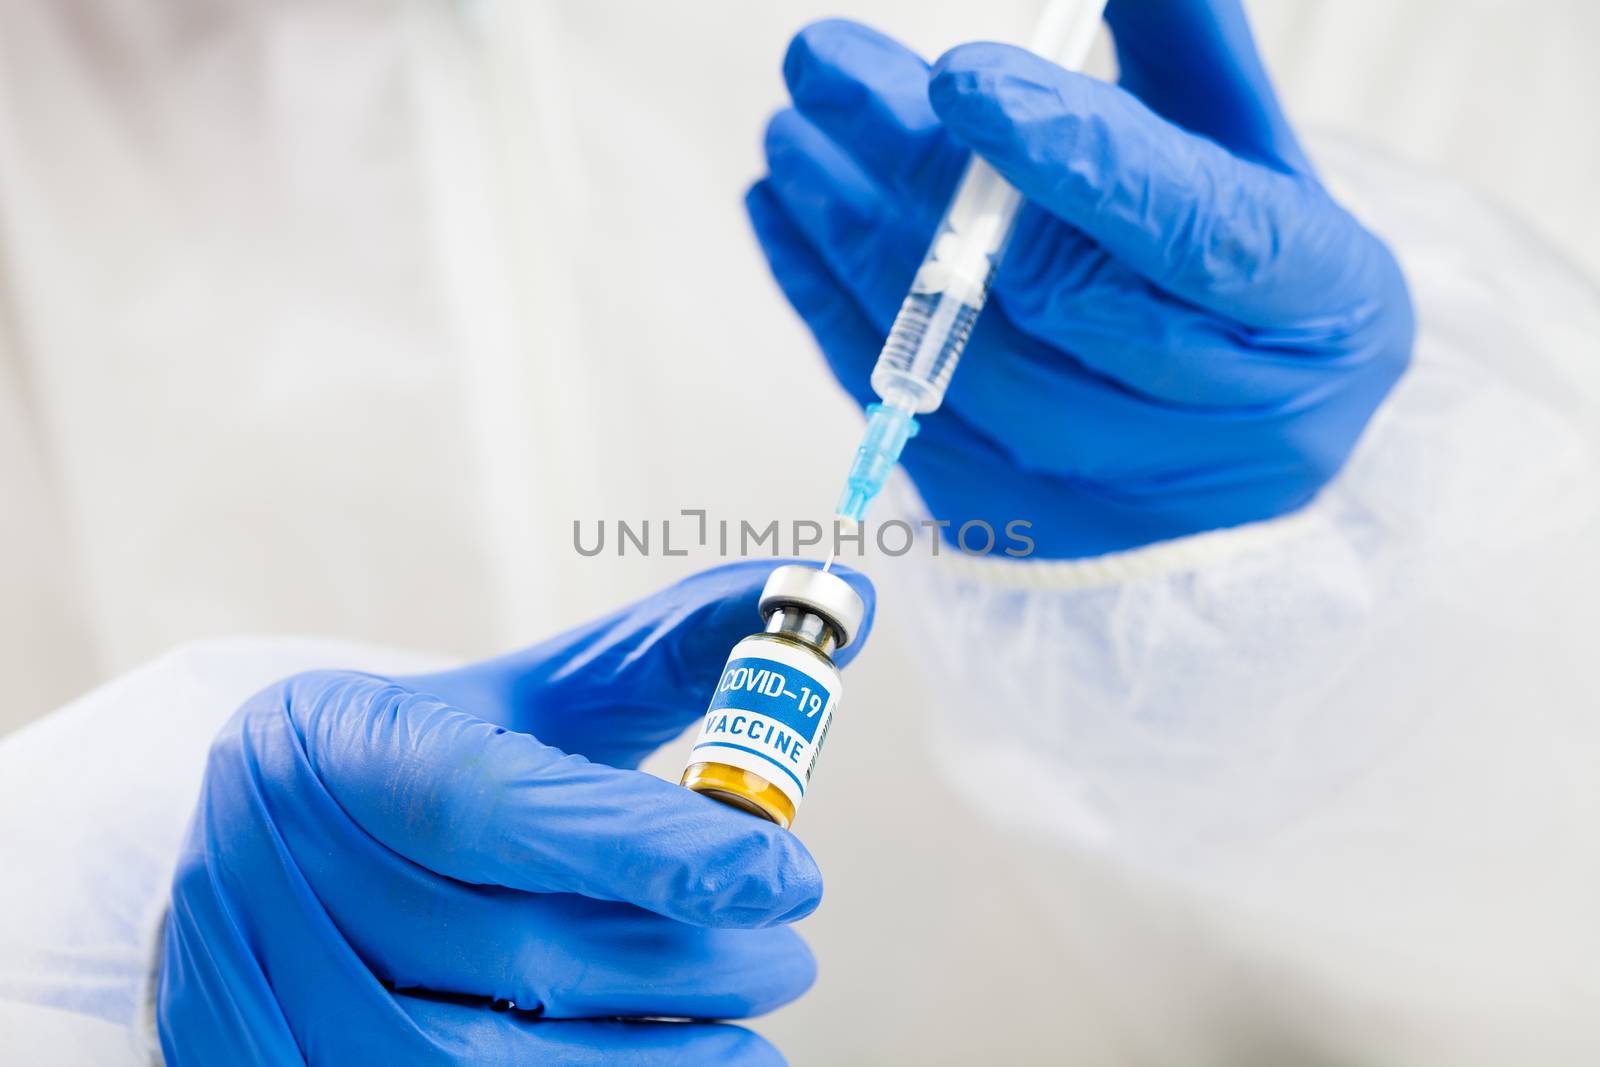 Coronavirus COVID-19 vaccine development,research for cure and treatment of infected patients,groundbreaking discovery in battle against SARS-CoV-2 pathogen,hands in gloves holding ampoule and syringe